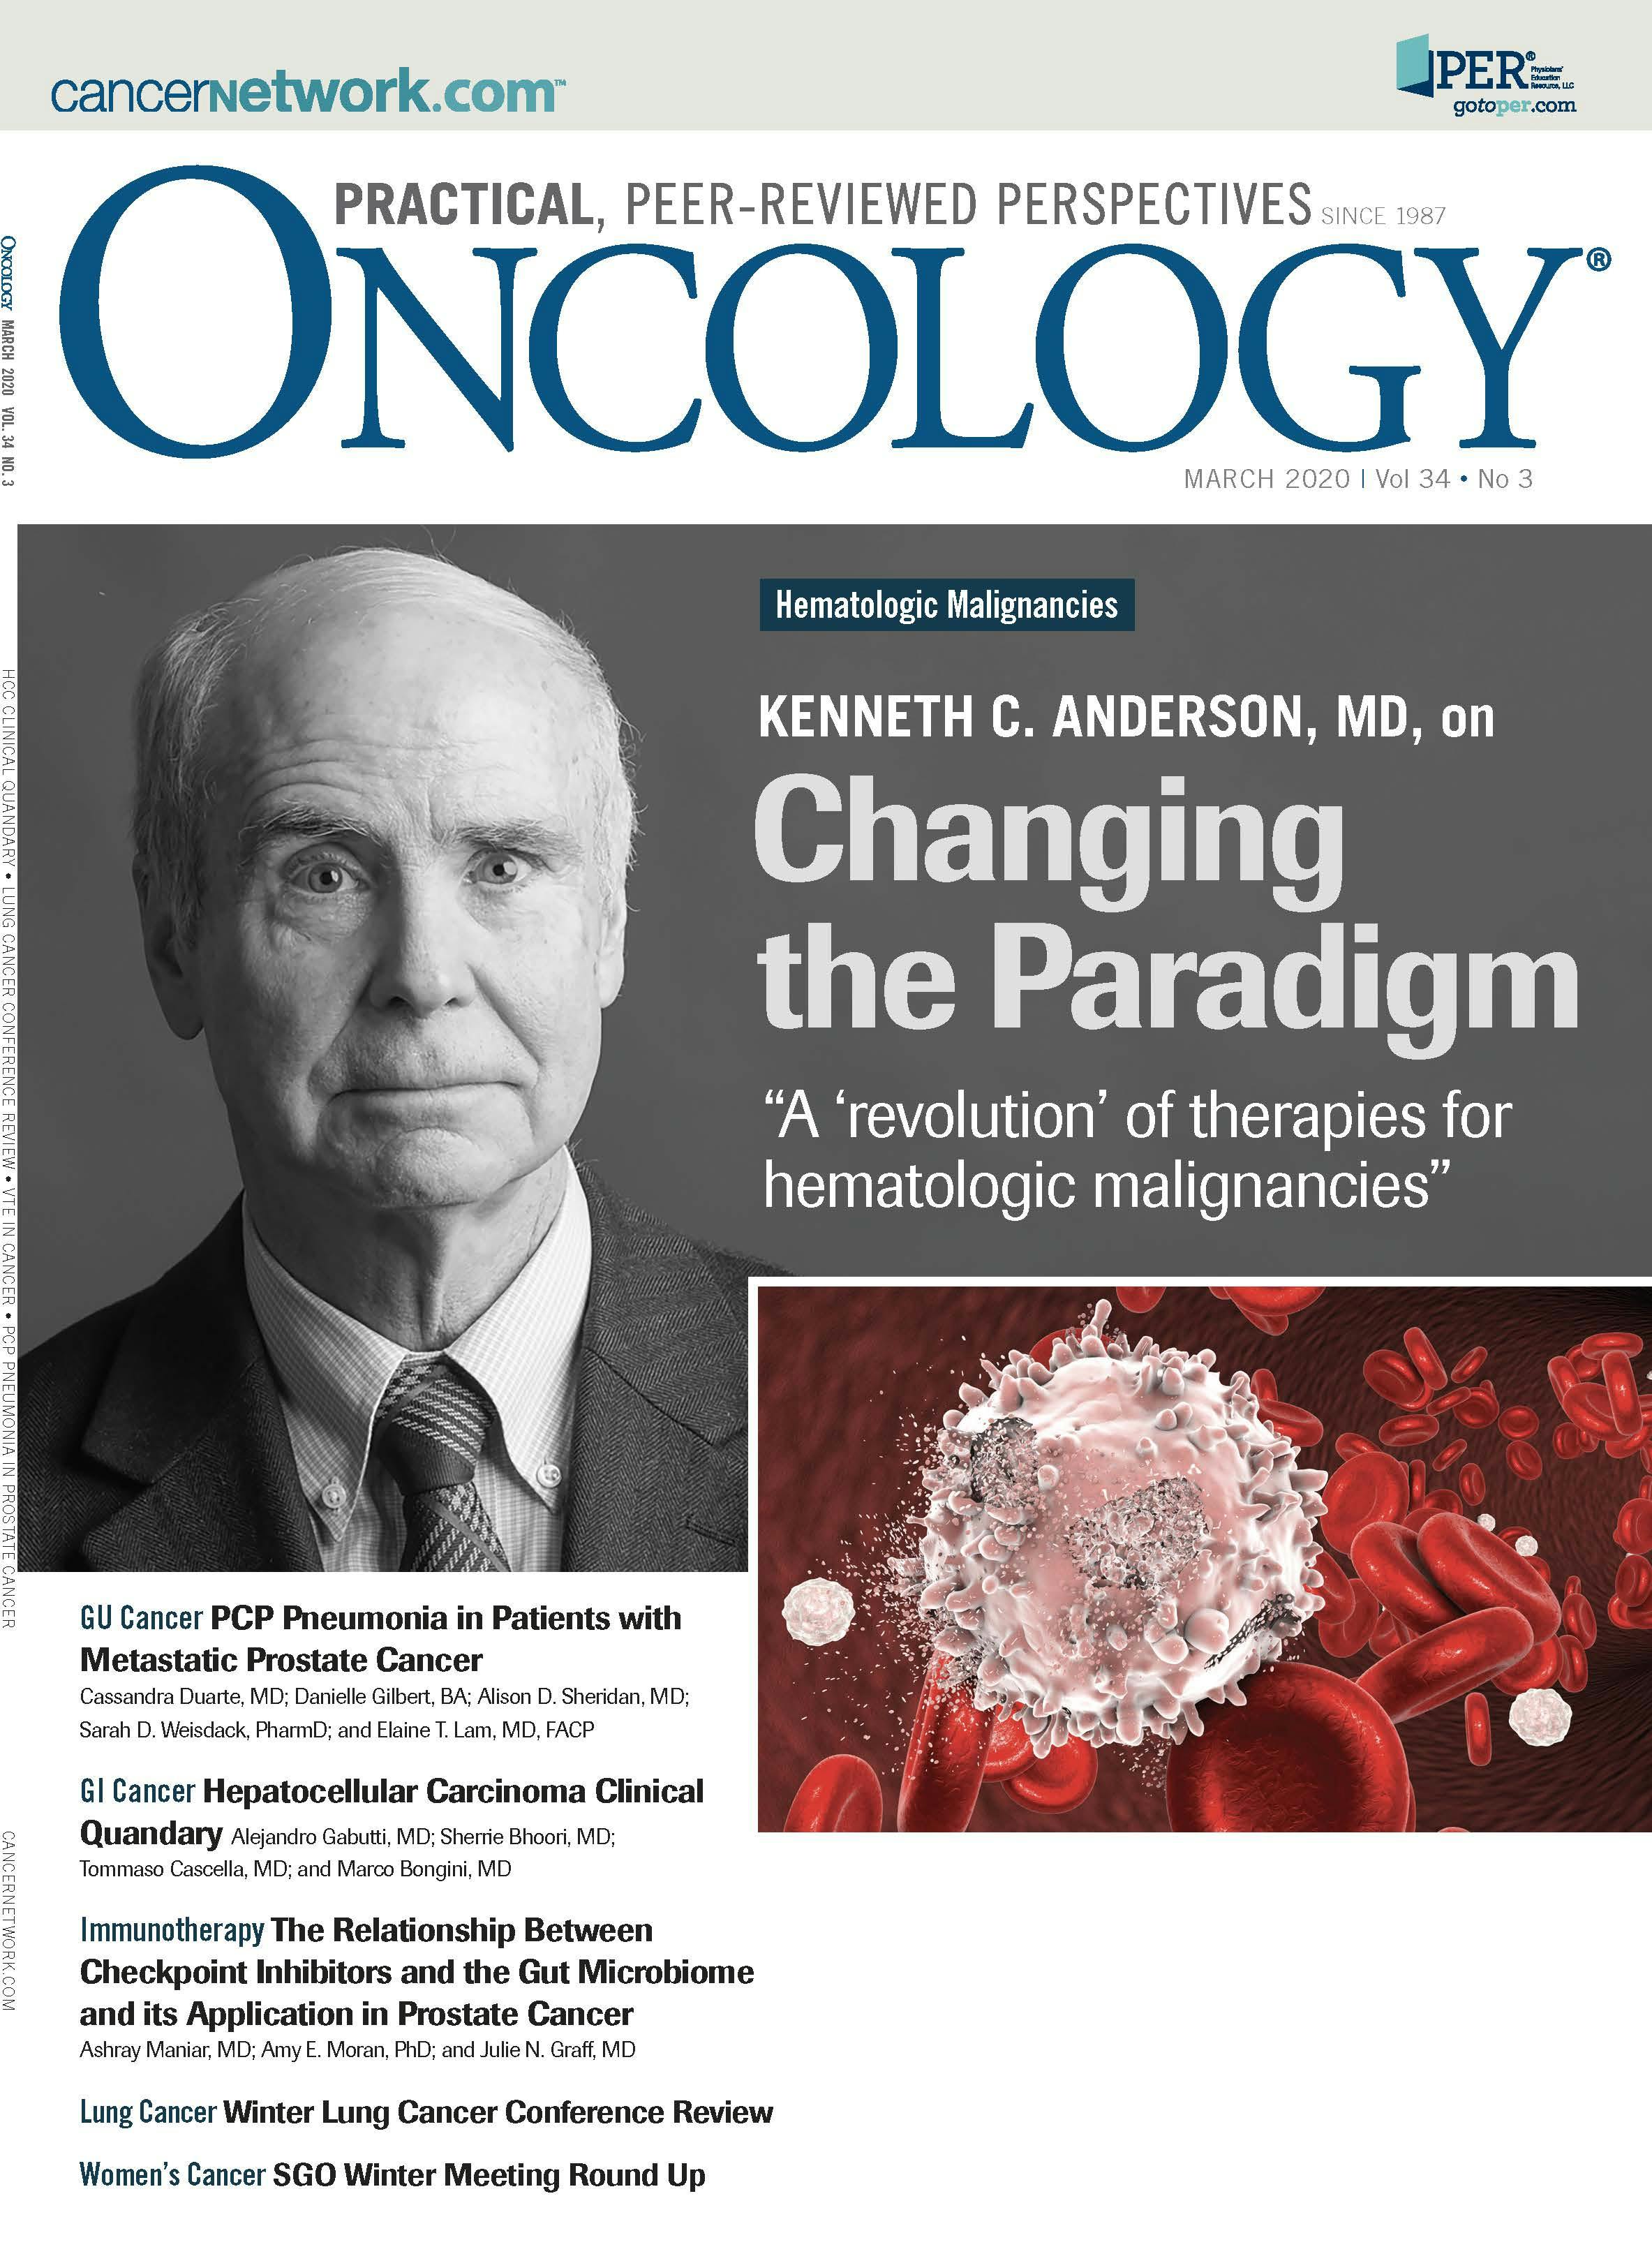 ONCOLOGY Vol 34 Issue 3